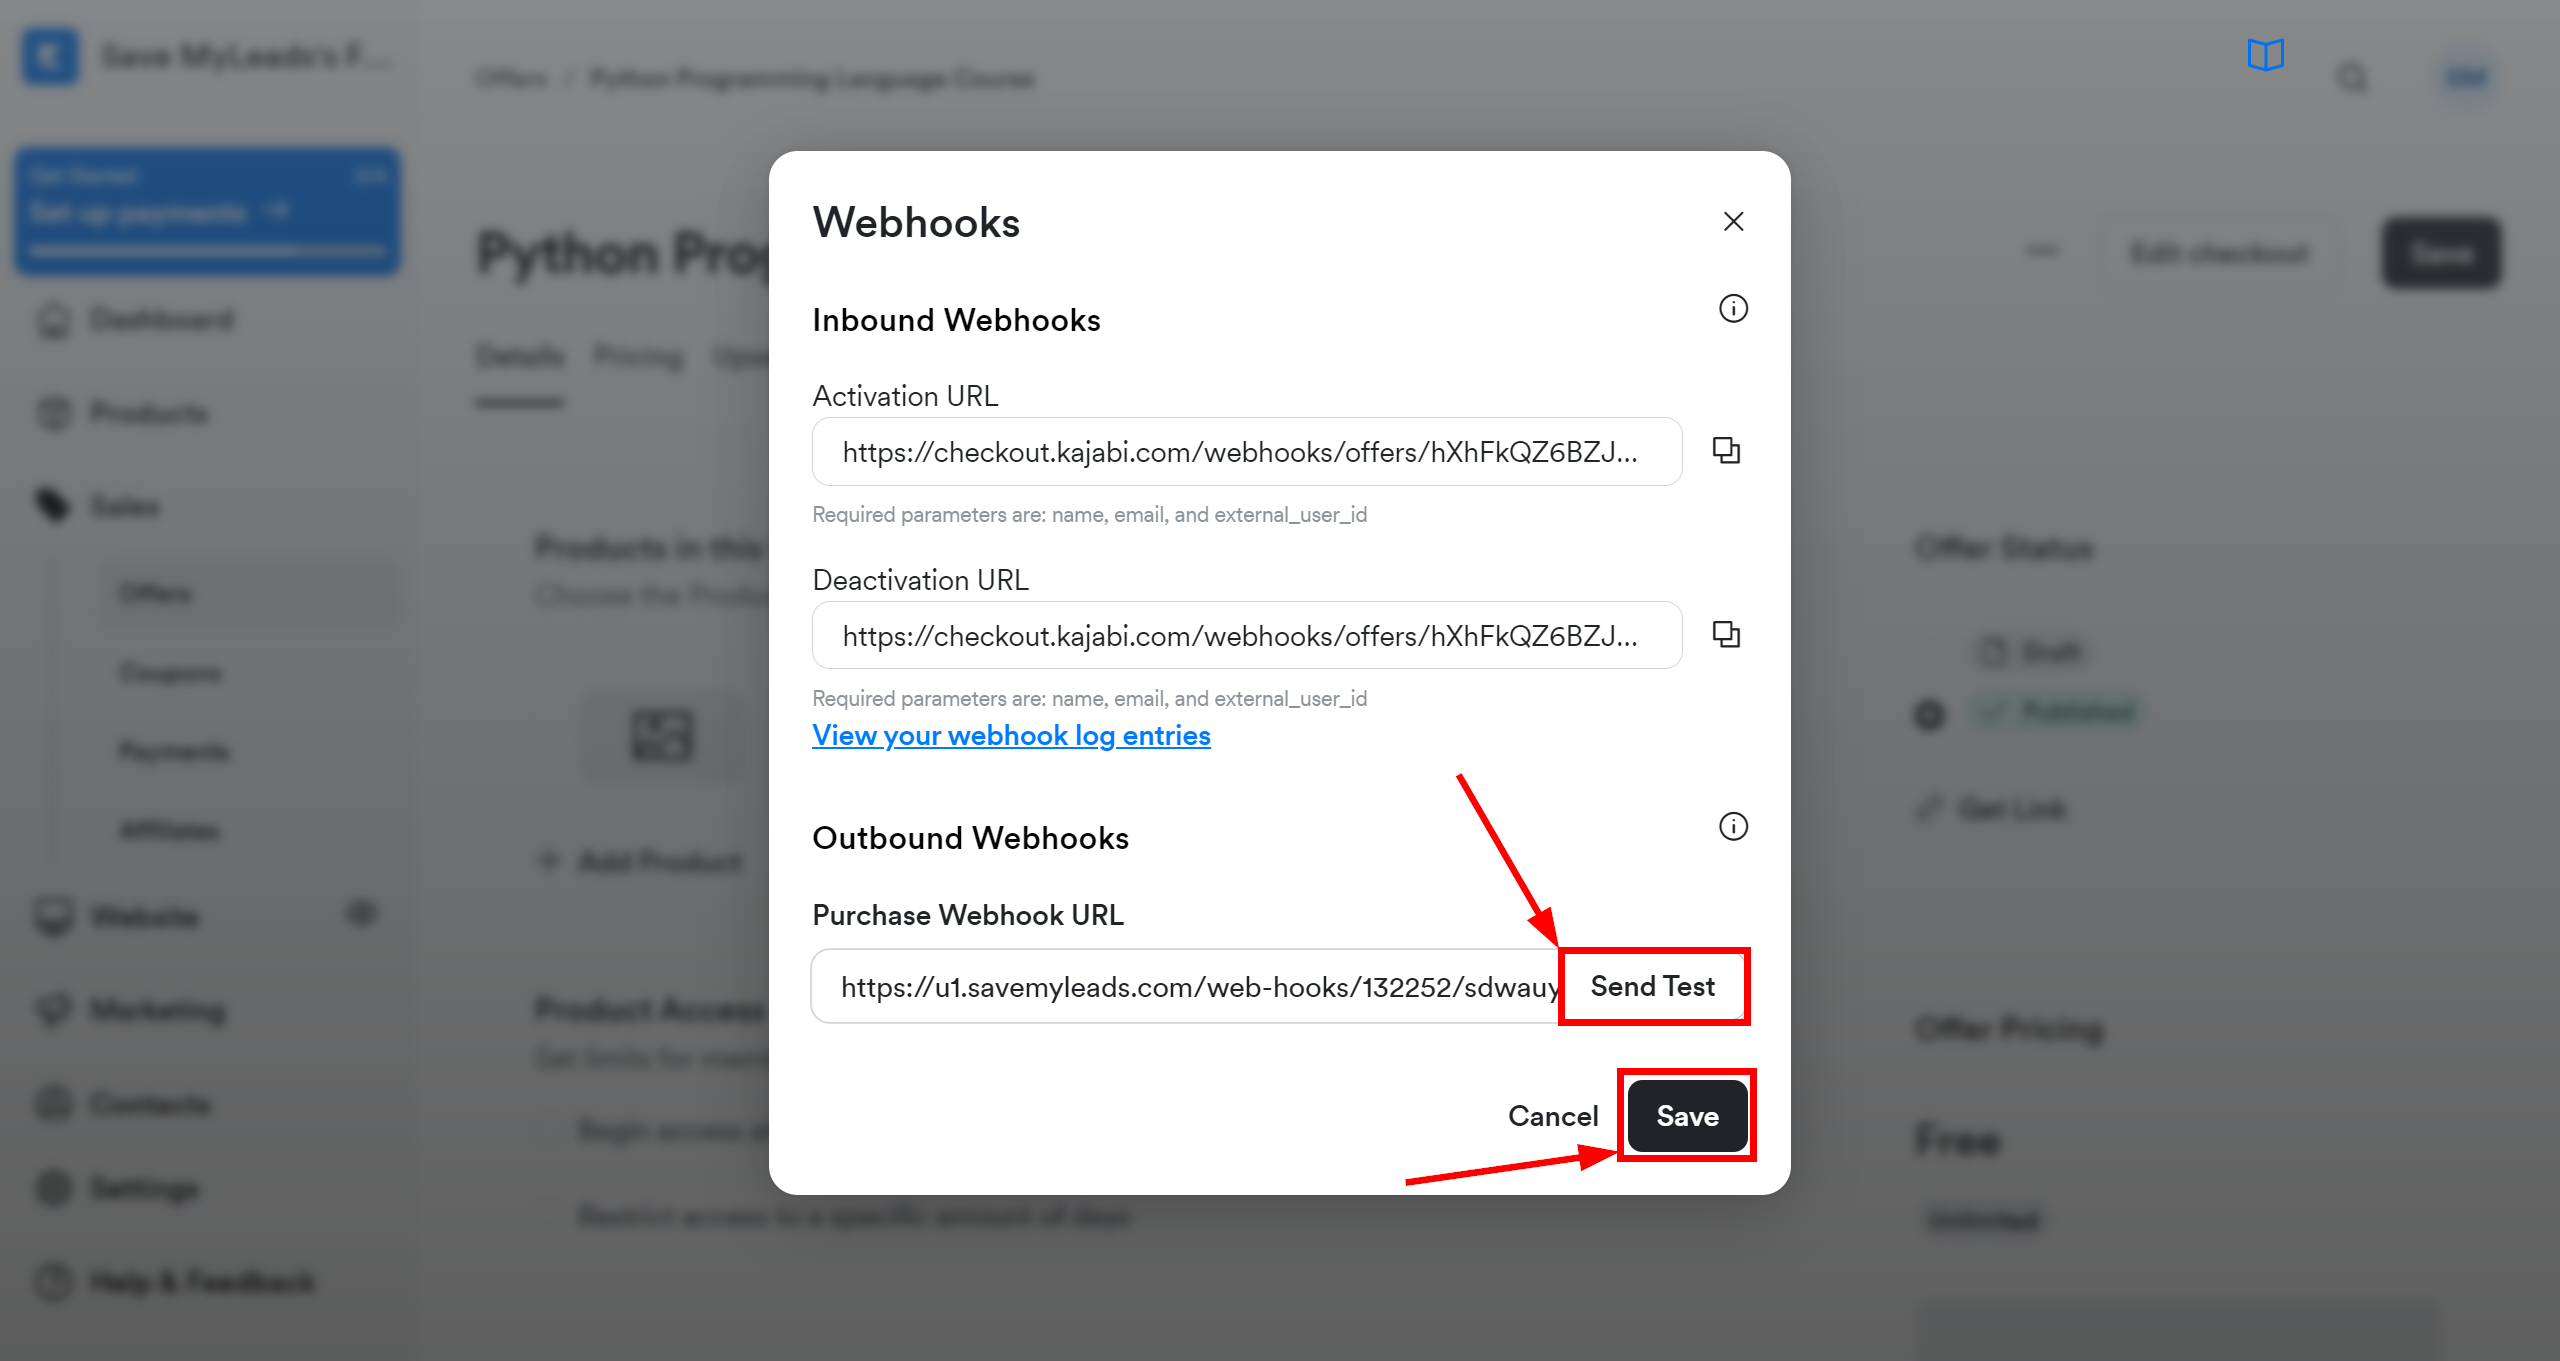 How to Connect Webhooks with ClickUp | Data Source account connection